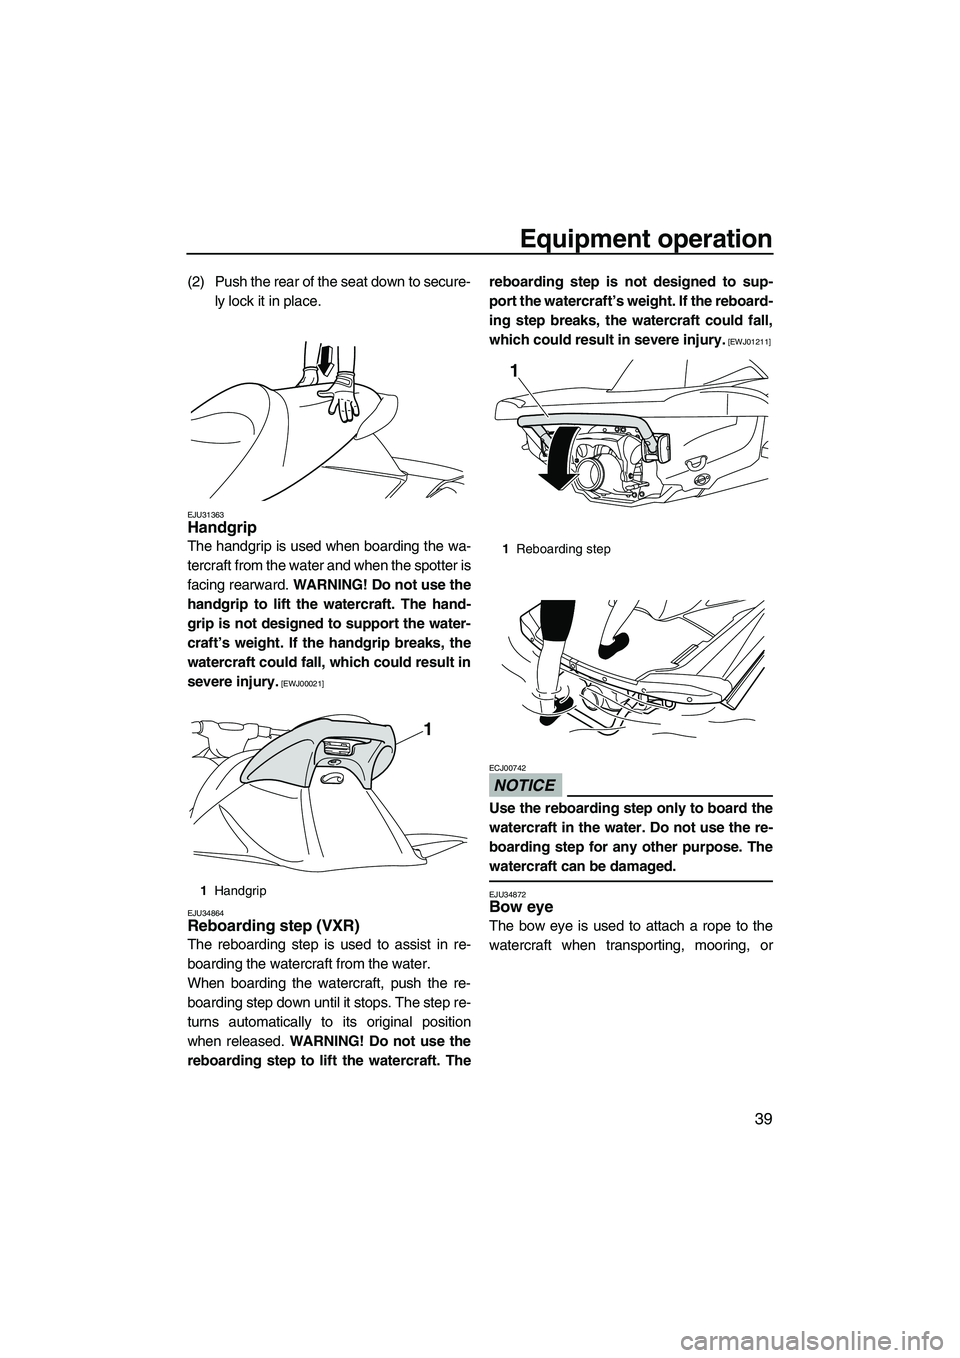 YAMAHA VXS 2012  Owners Manual Equipment operation
39
(2) Push the rear of the seat down to secure-
ly lock it in place.
EJU31363Handgrip 
The handgrip is used when boarding the wa-
tercraft from the water and when the spotter is
f